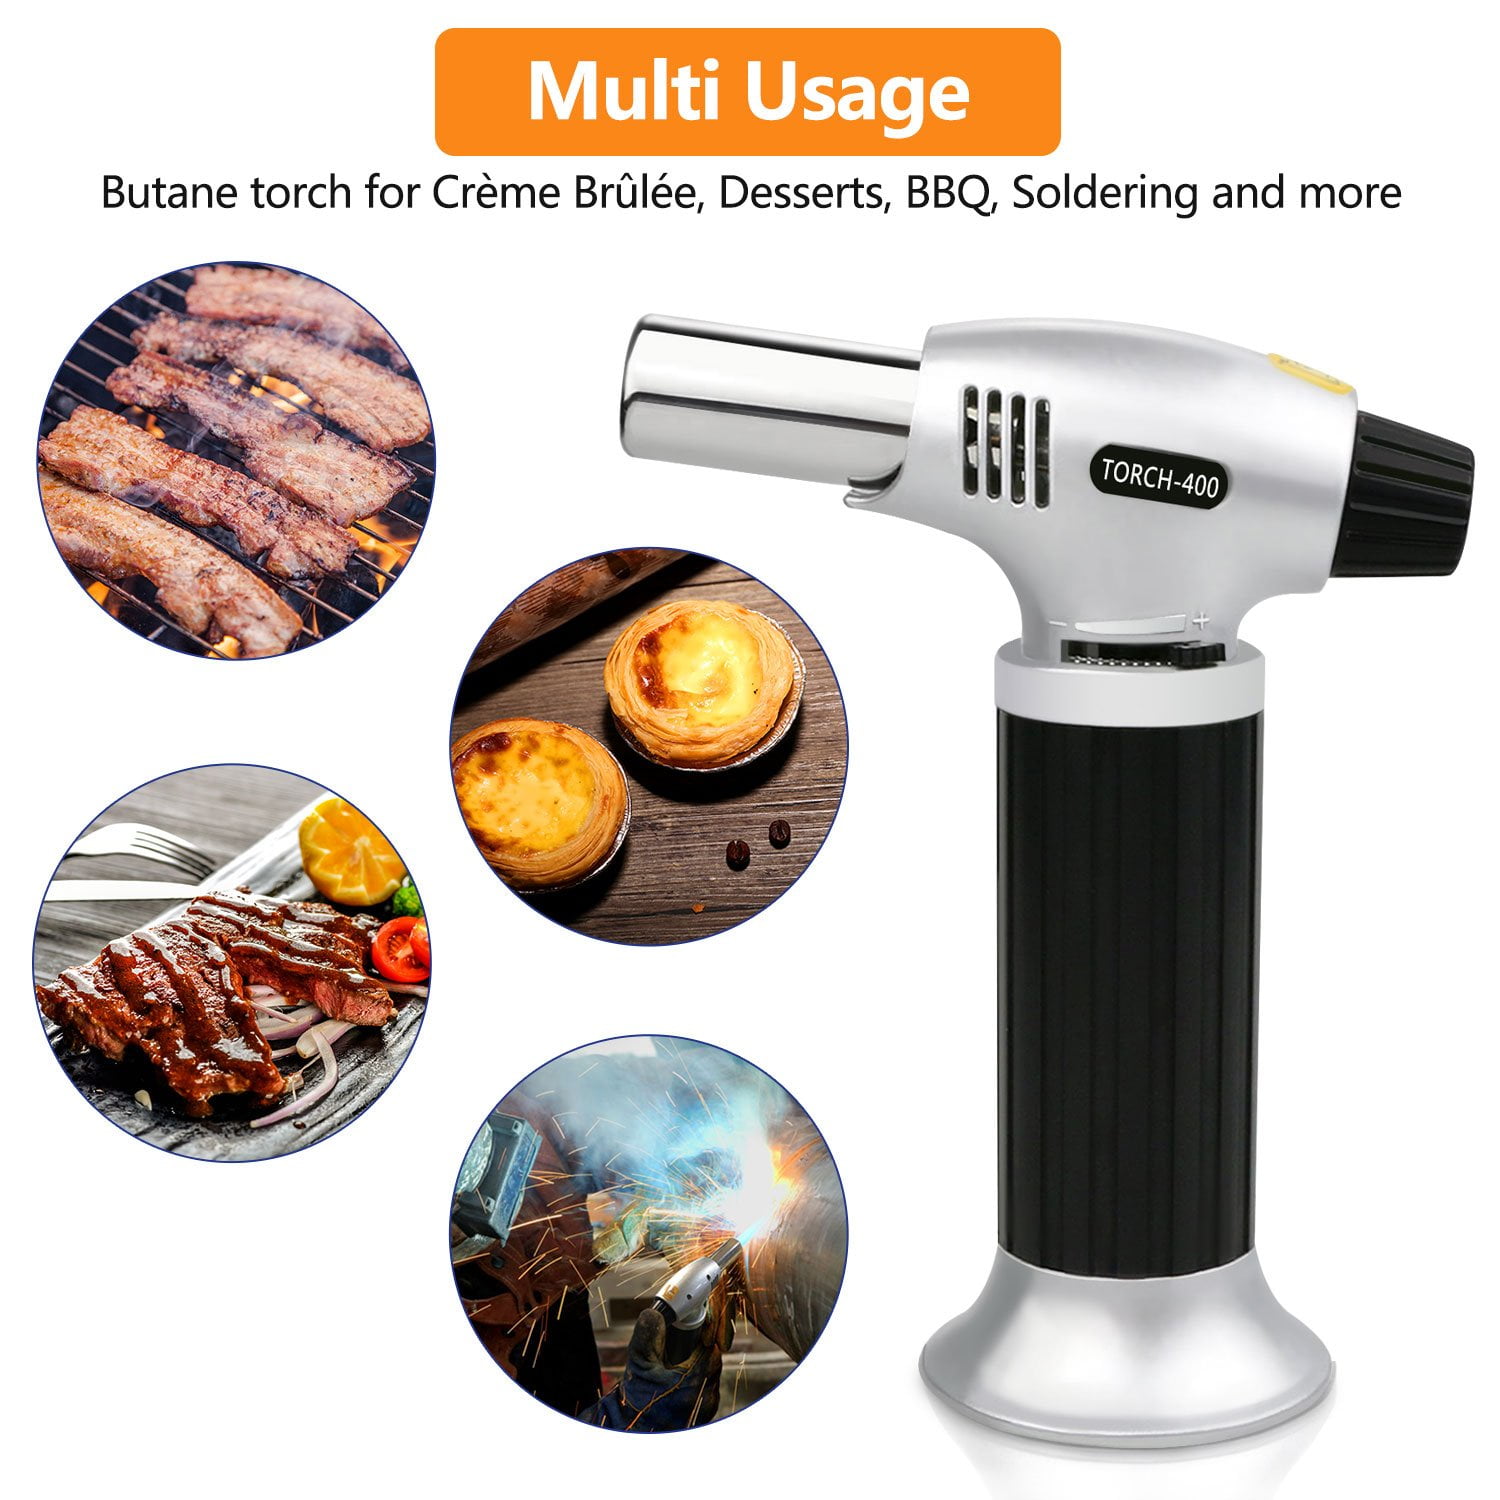 Culinary Butane Torch Blazing Pastries Meat Buta DIY Soldering Desserts Seafood Baking BBQ Refillable Kitchen Blow Torch Lighter with Safety Lock Adjustable Flame for Creme Brulee Camping 